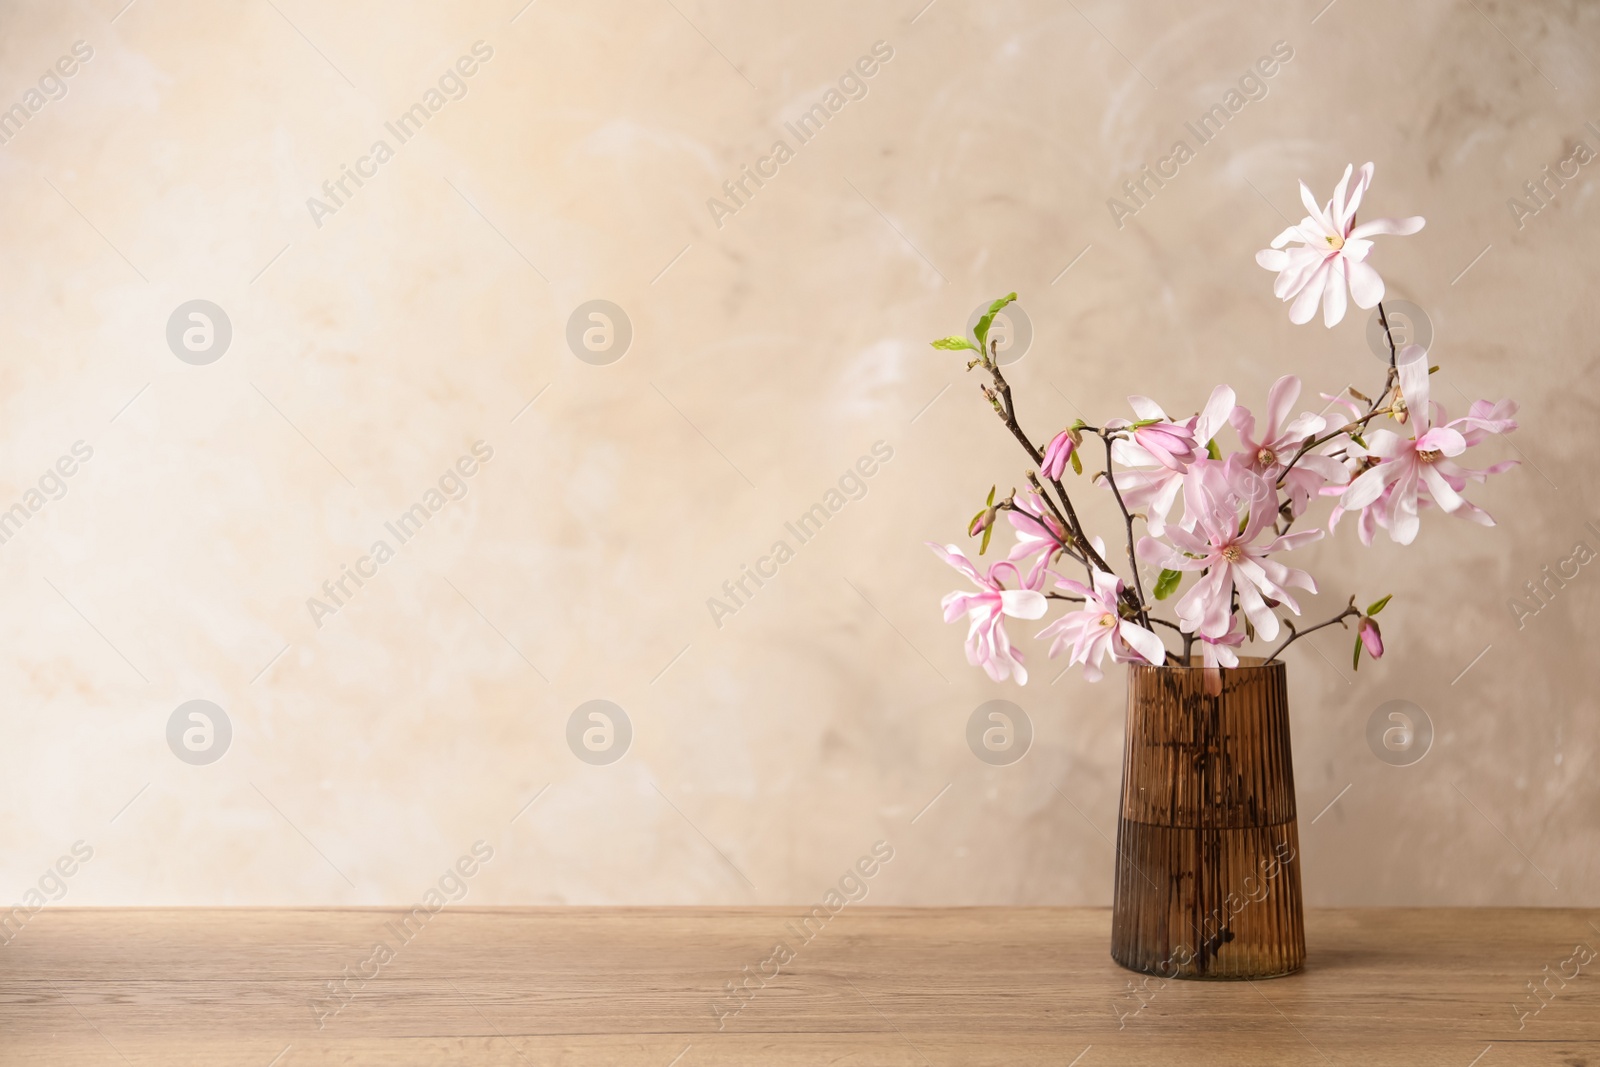 Photo of Magnolia tree branches with beautiful flowers in glass vase on wooden table against beige background, space for text